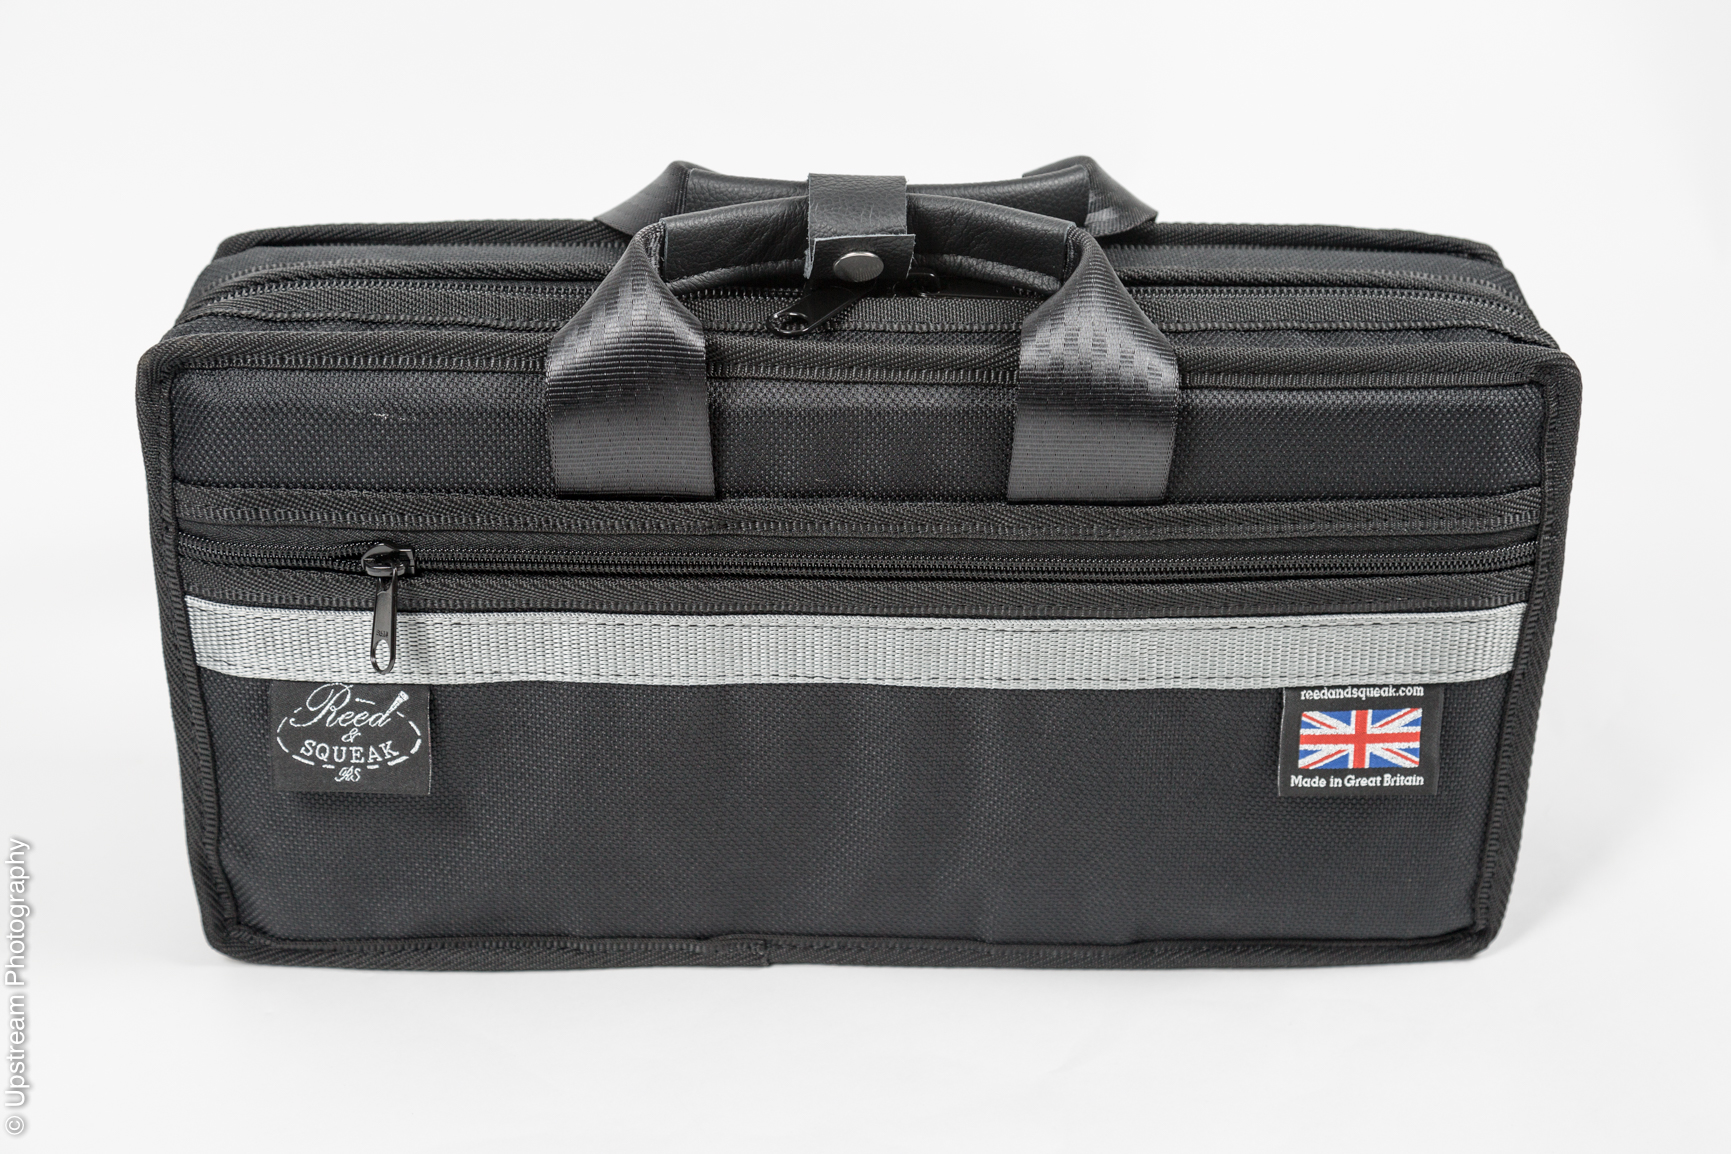 Clarinet case for sale-Double Case (shoulder) for Flute and Clarinet (or Eb  + Bb)